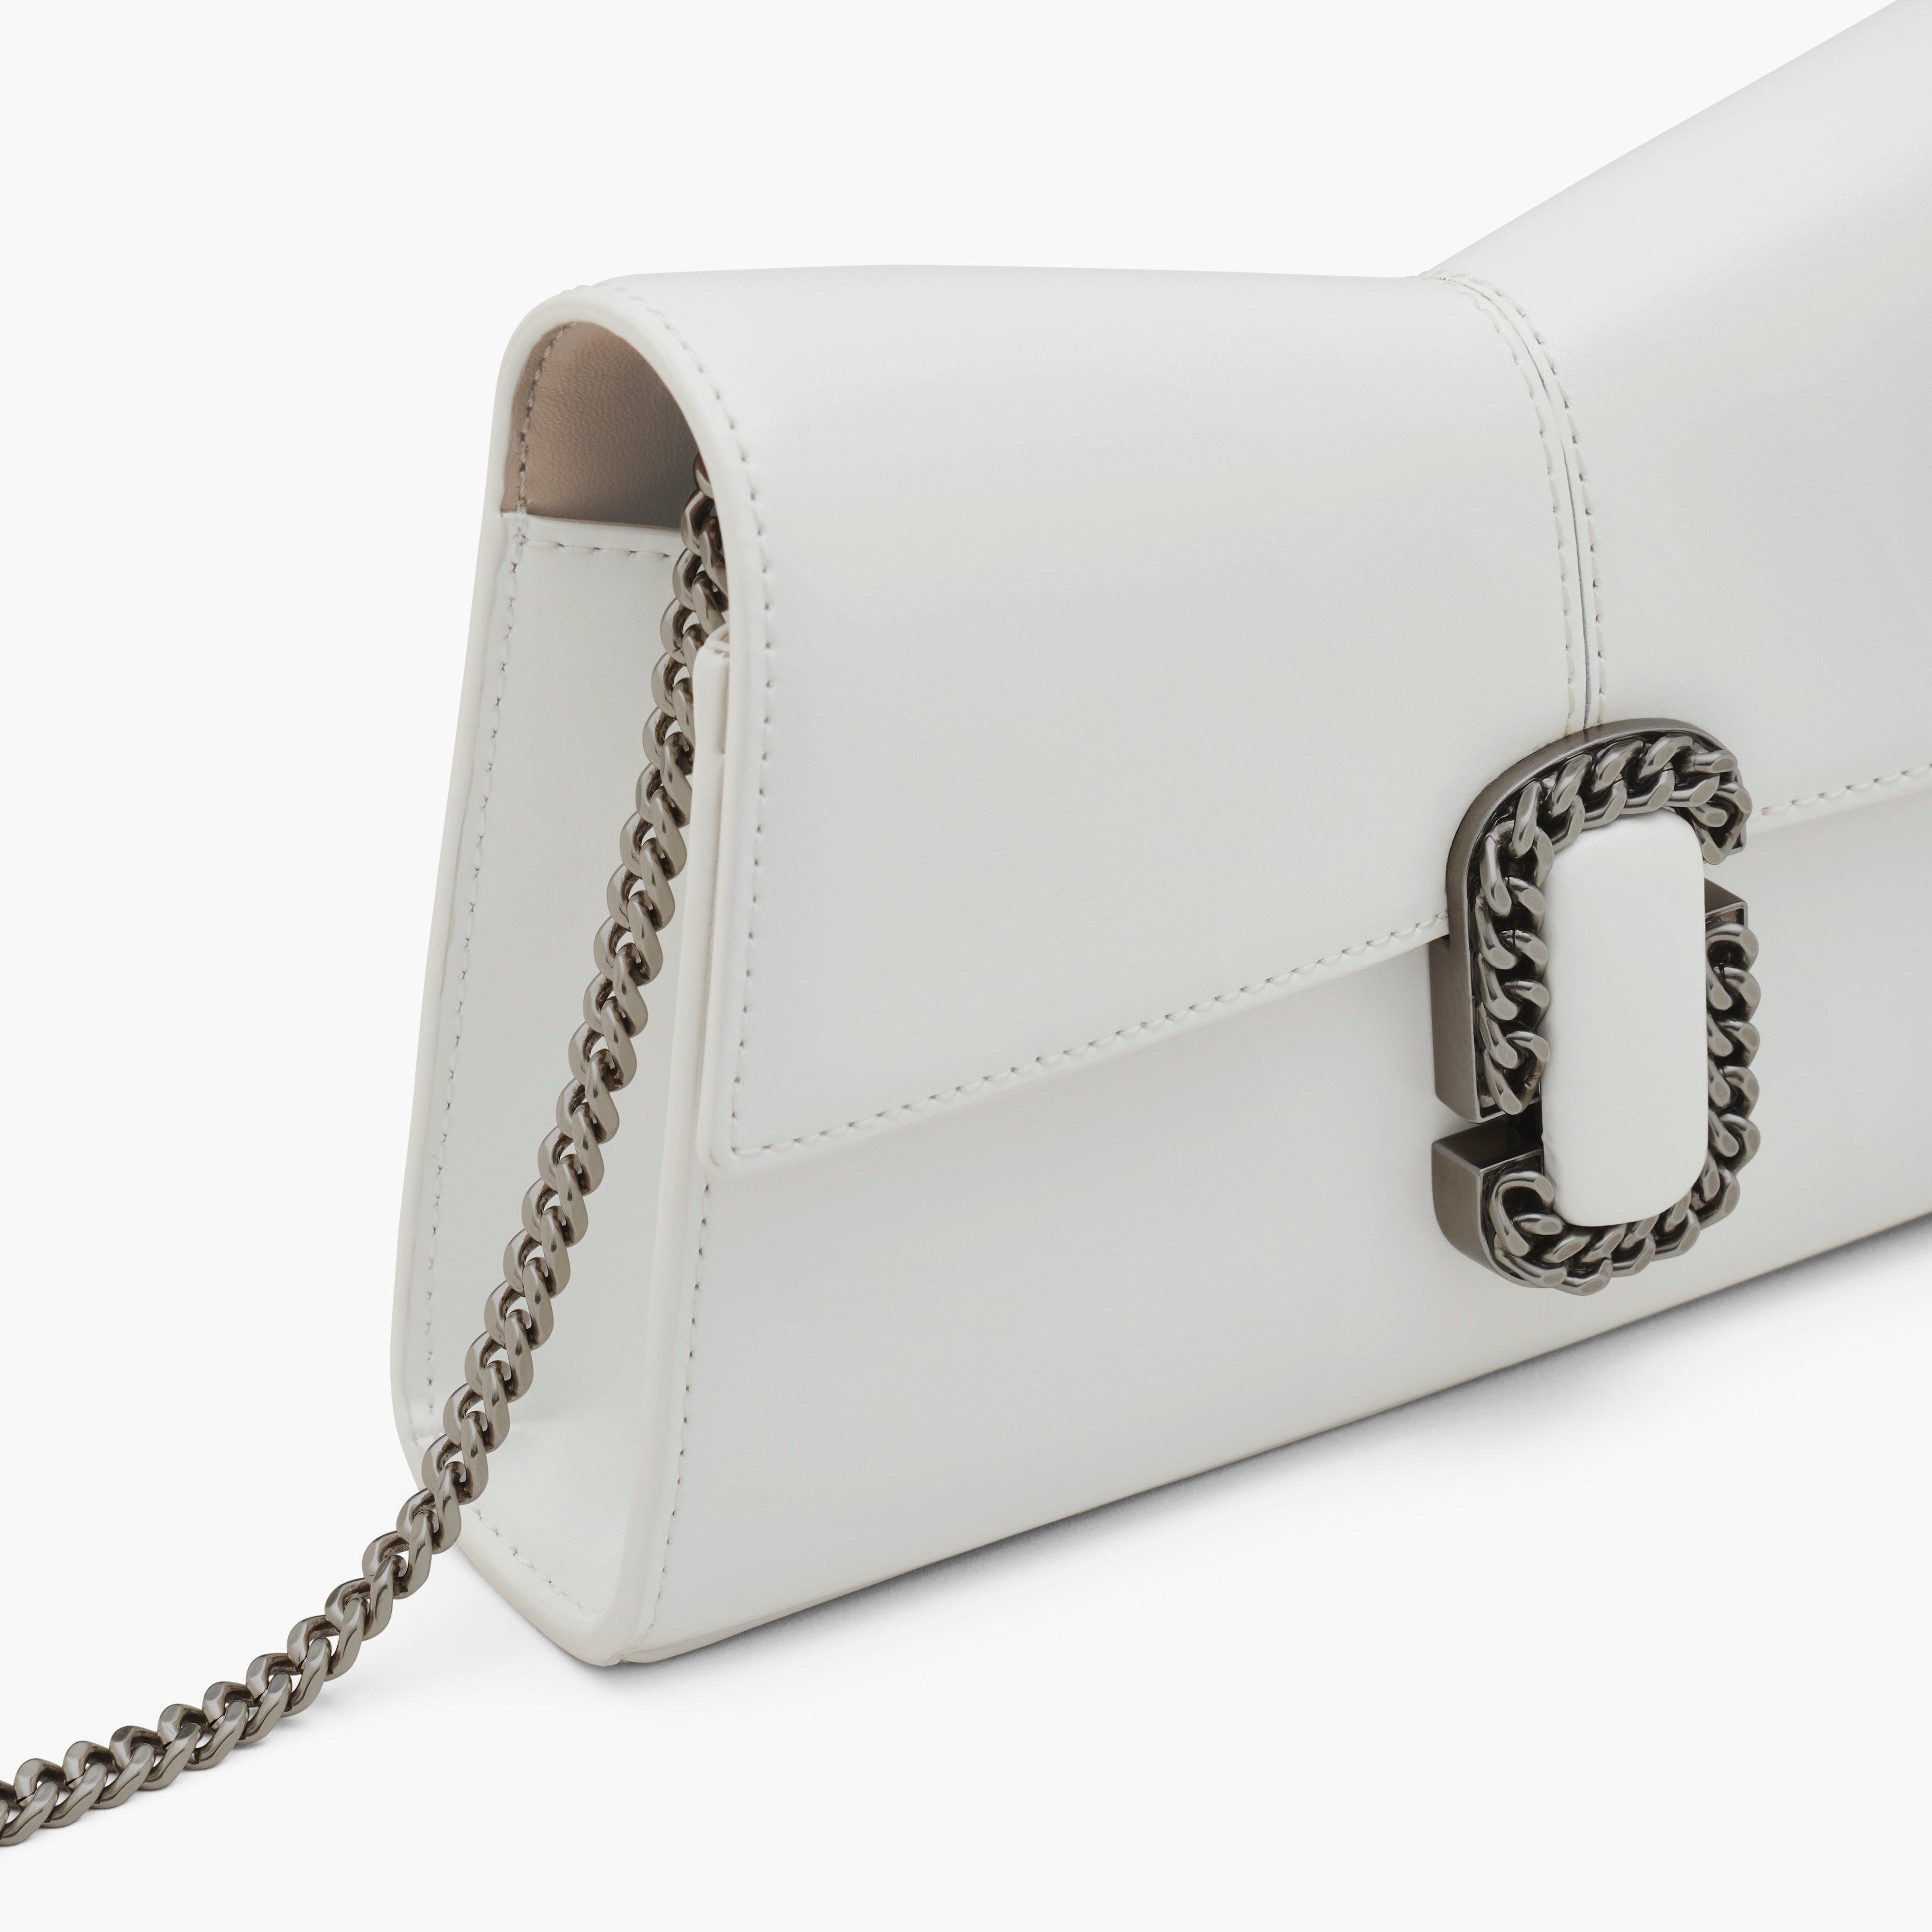 THE ST. MARC CHAIN WALLET - 7